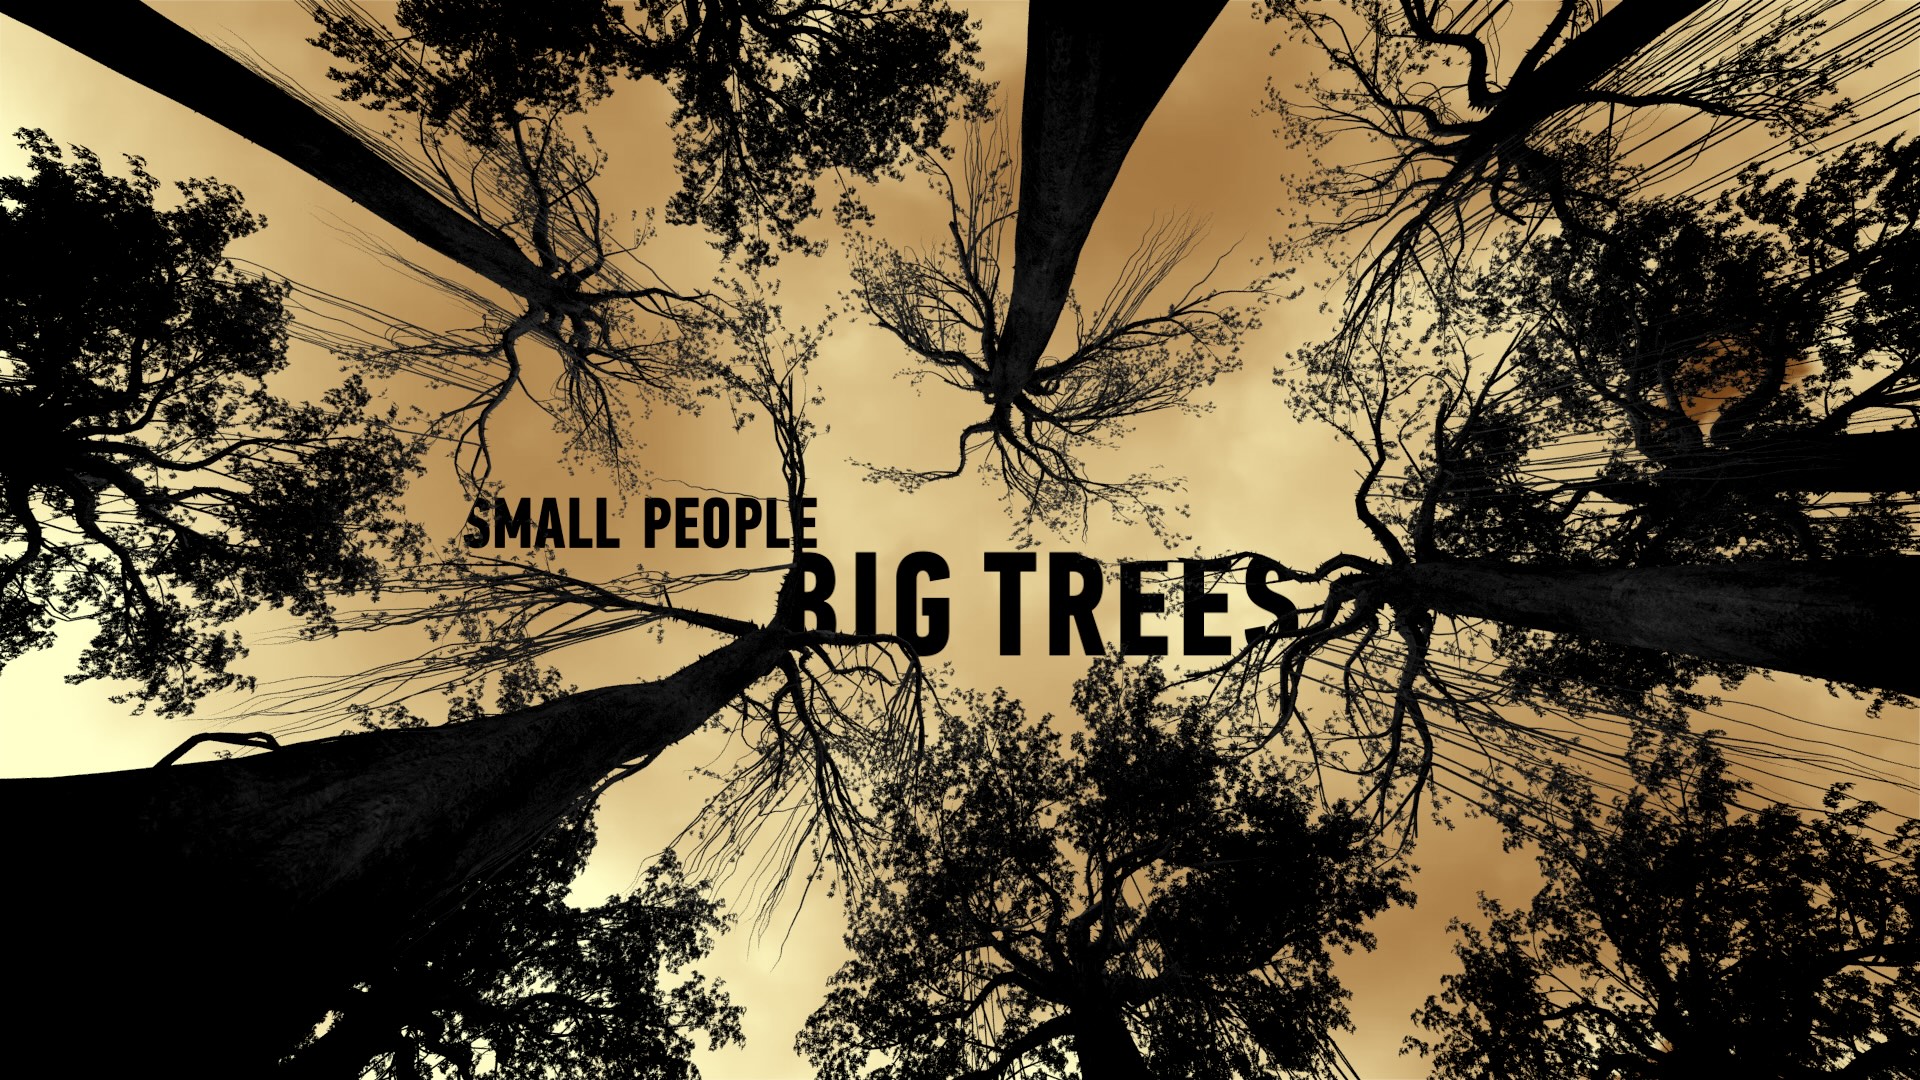 Special screening of the Documentary "Small People Big Trees"